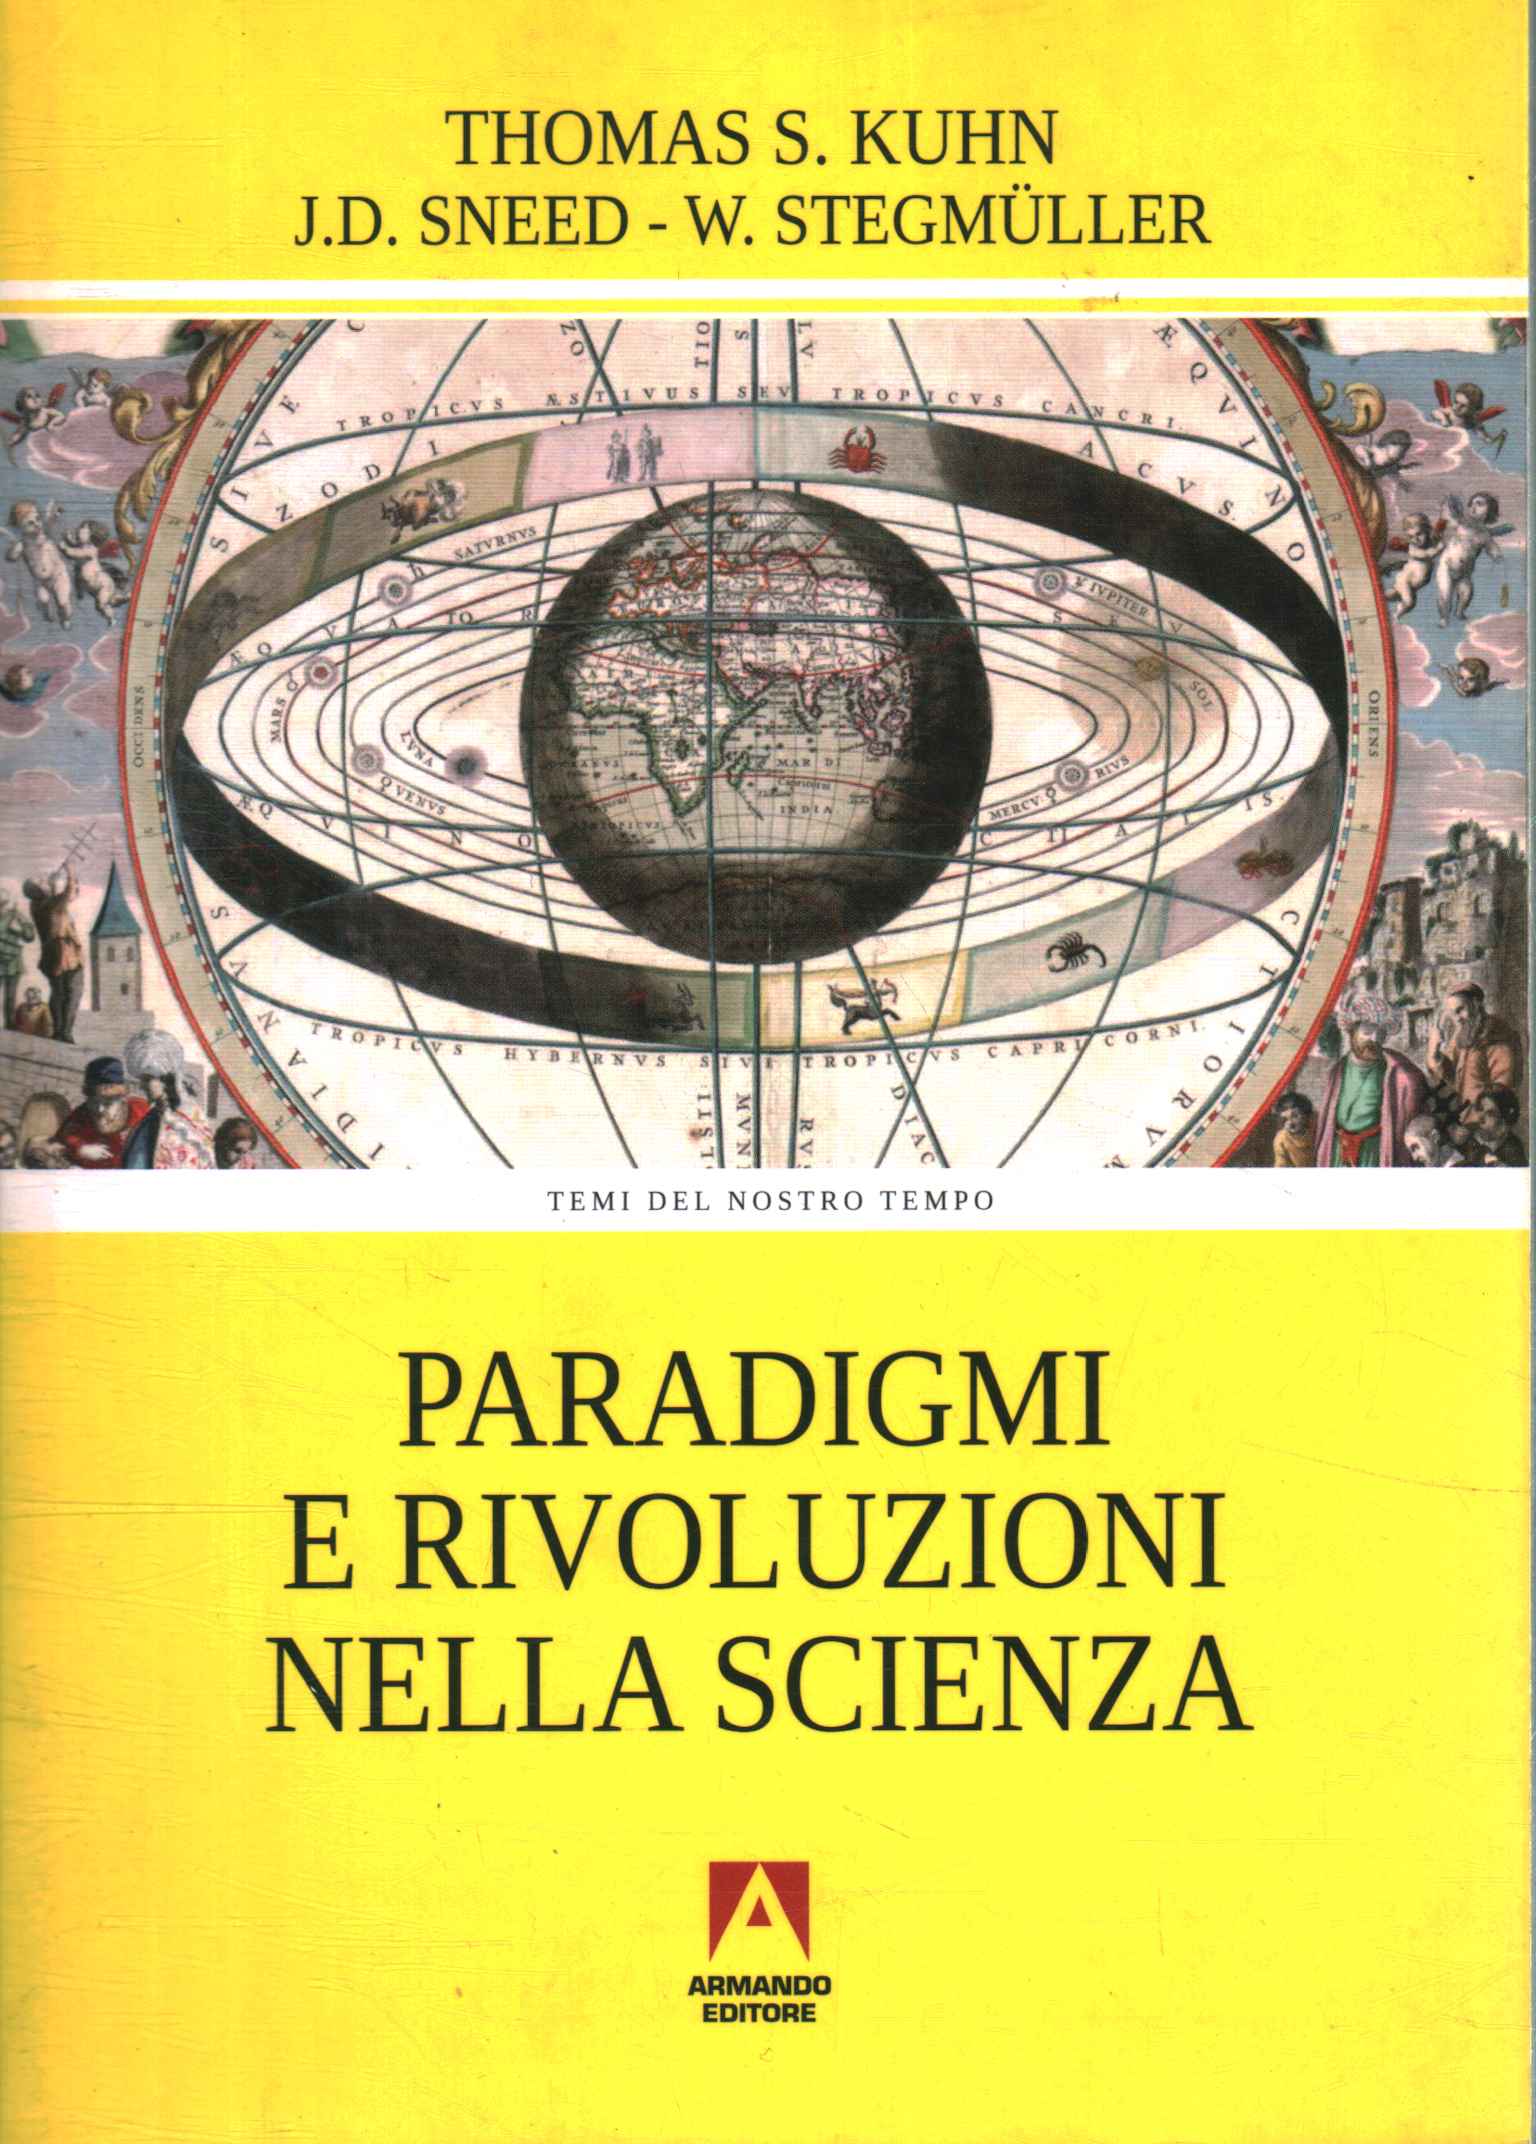 Paradigms and revolutions in science